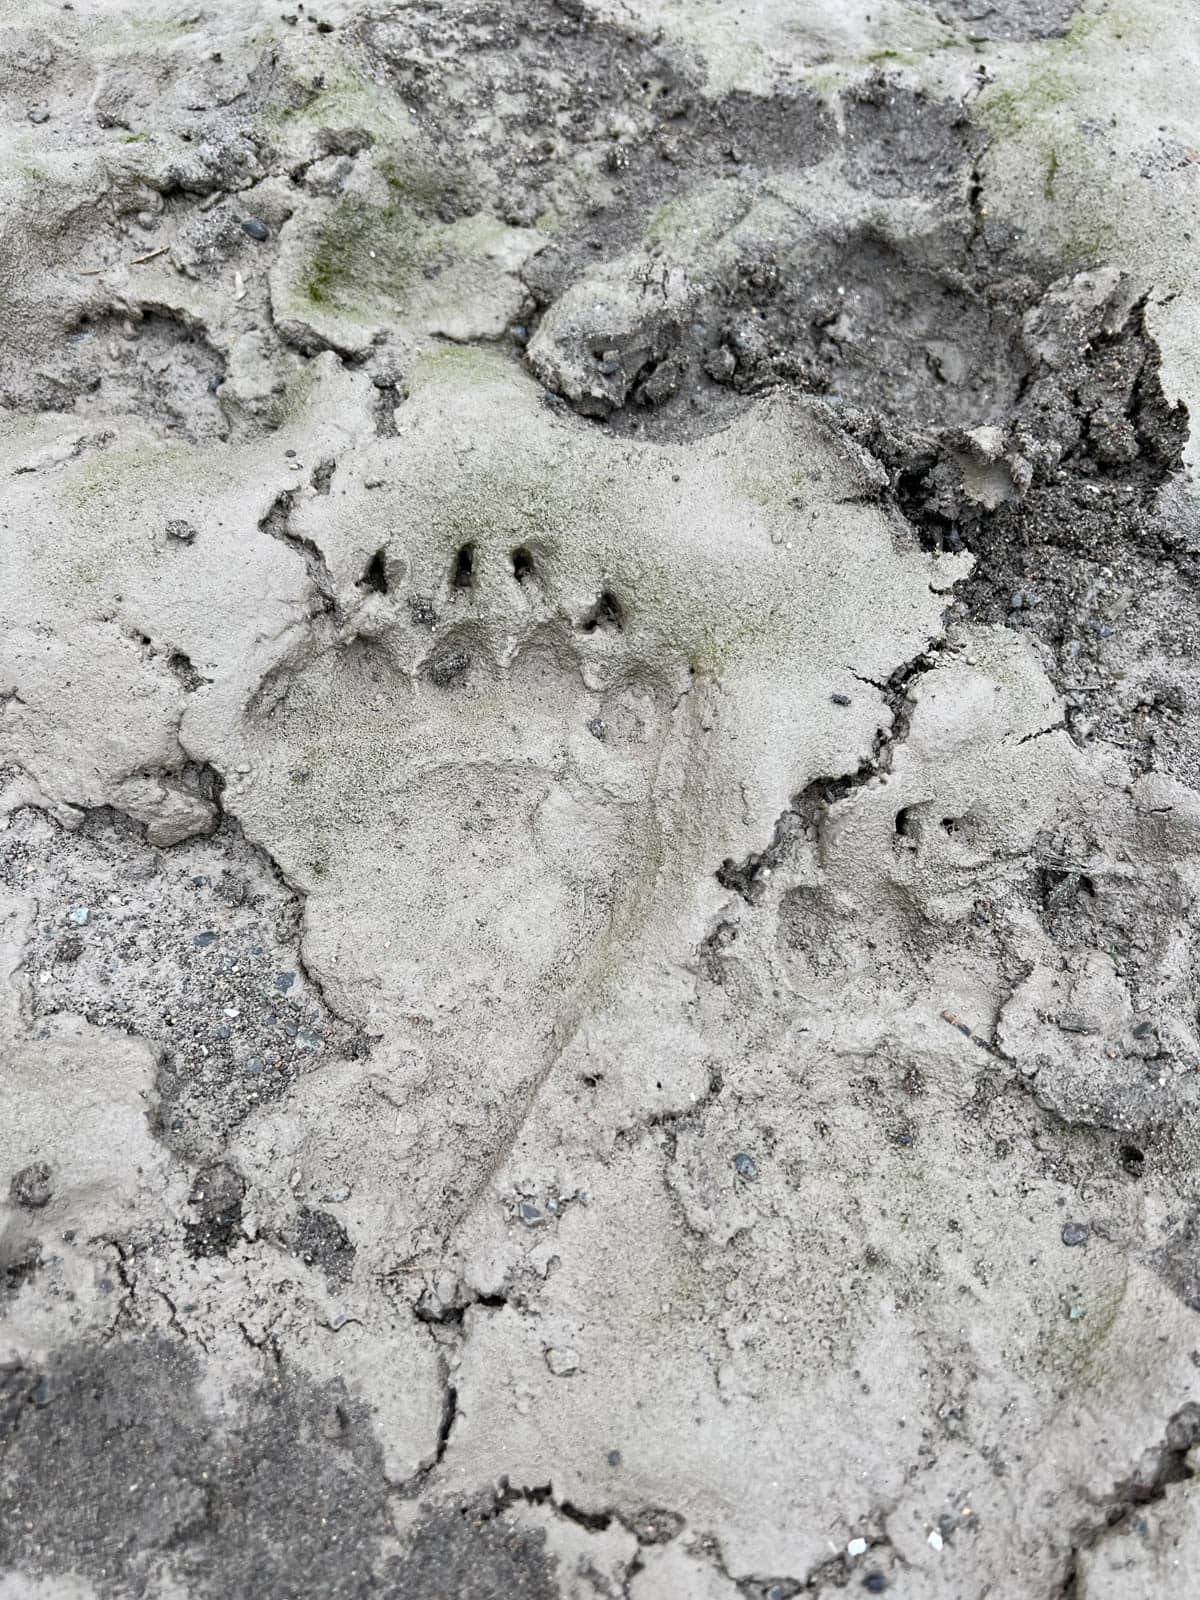 An image of a grizzly bear paw print in mud.